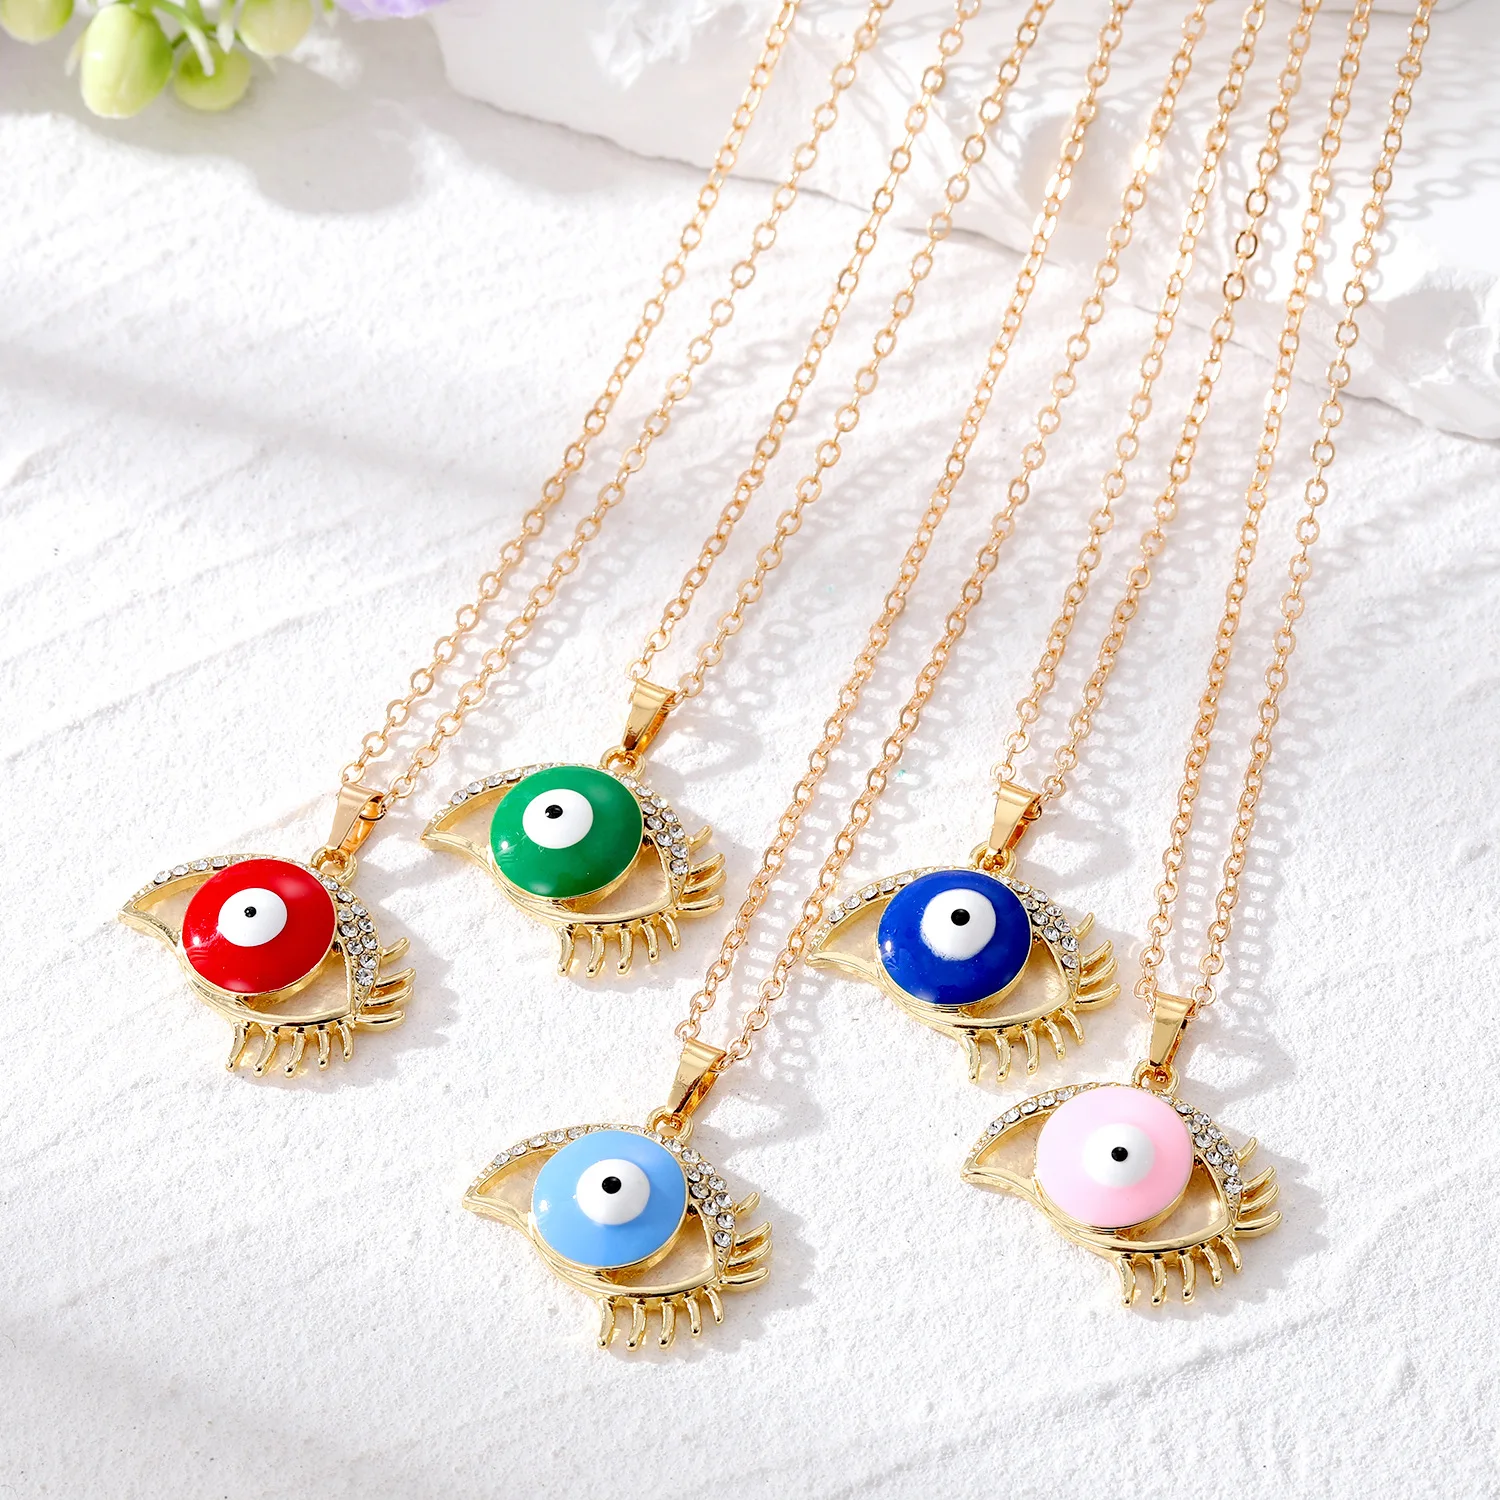 

20pcs Evil Eye Pendant Necklaces For Women Gift Jewelry Hollow Eyelash Turkish Blue Eye Sweater Clavicle Chain Necklace